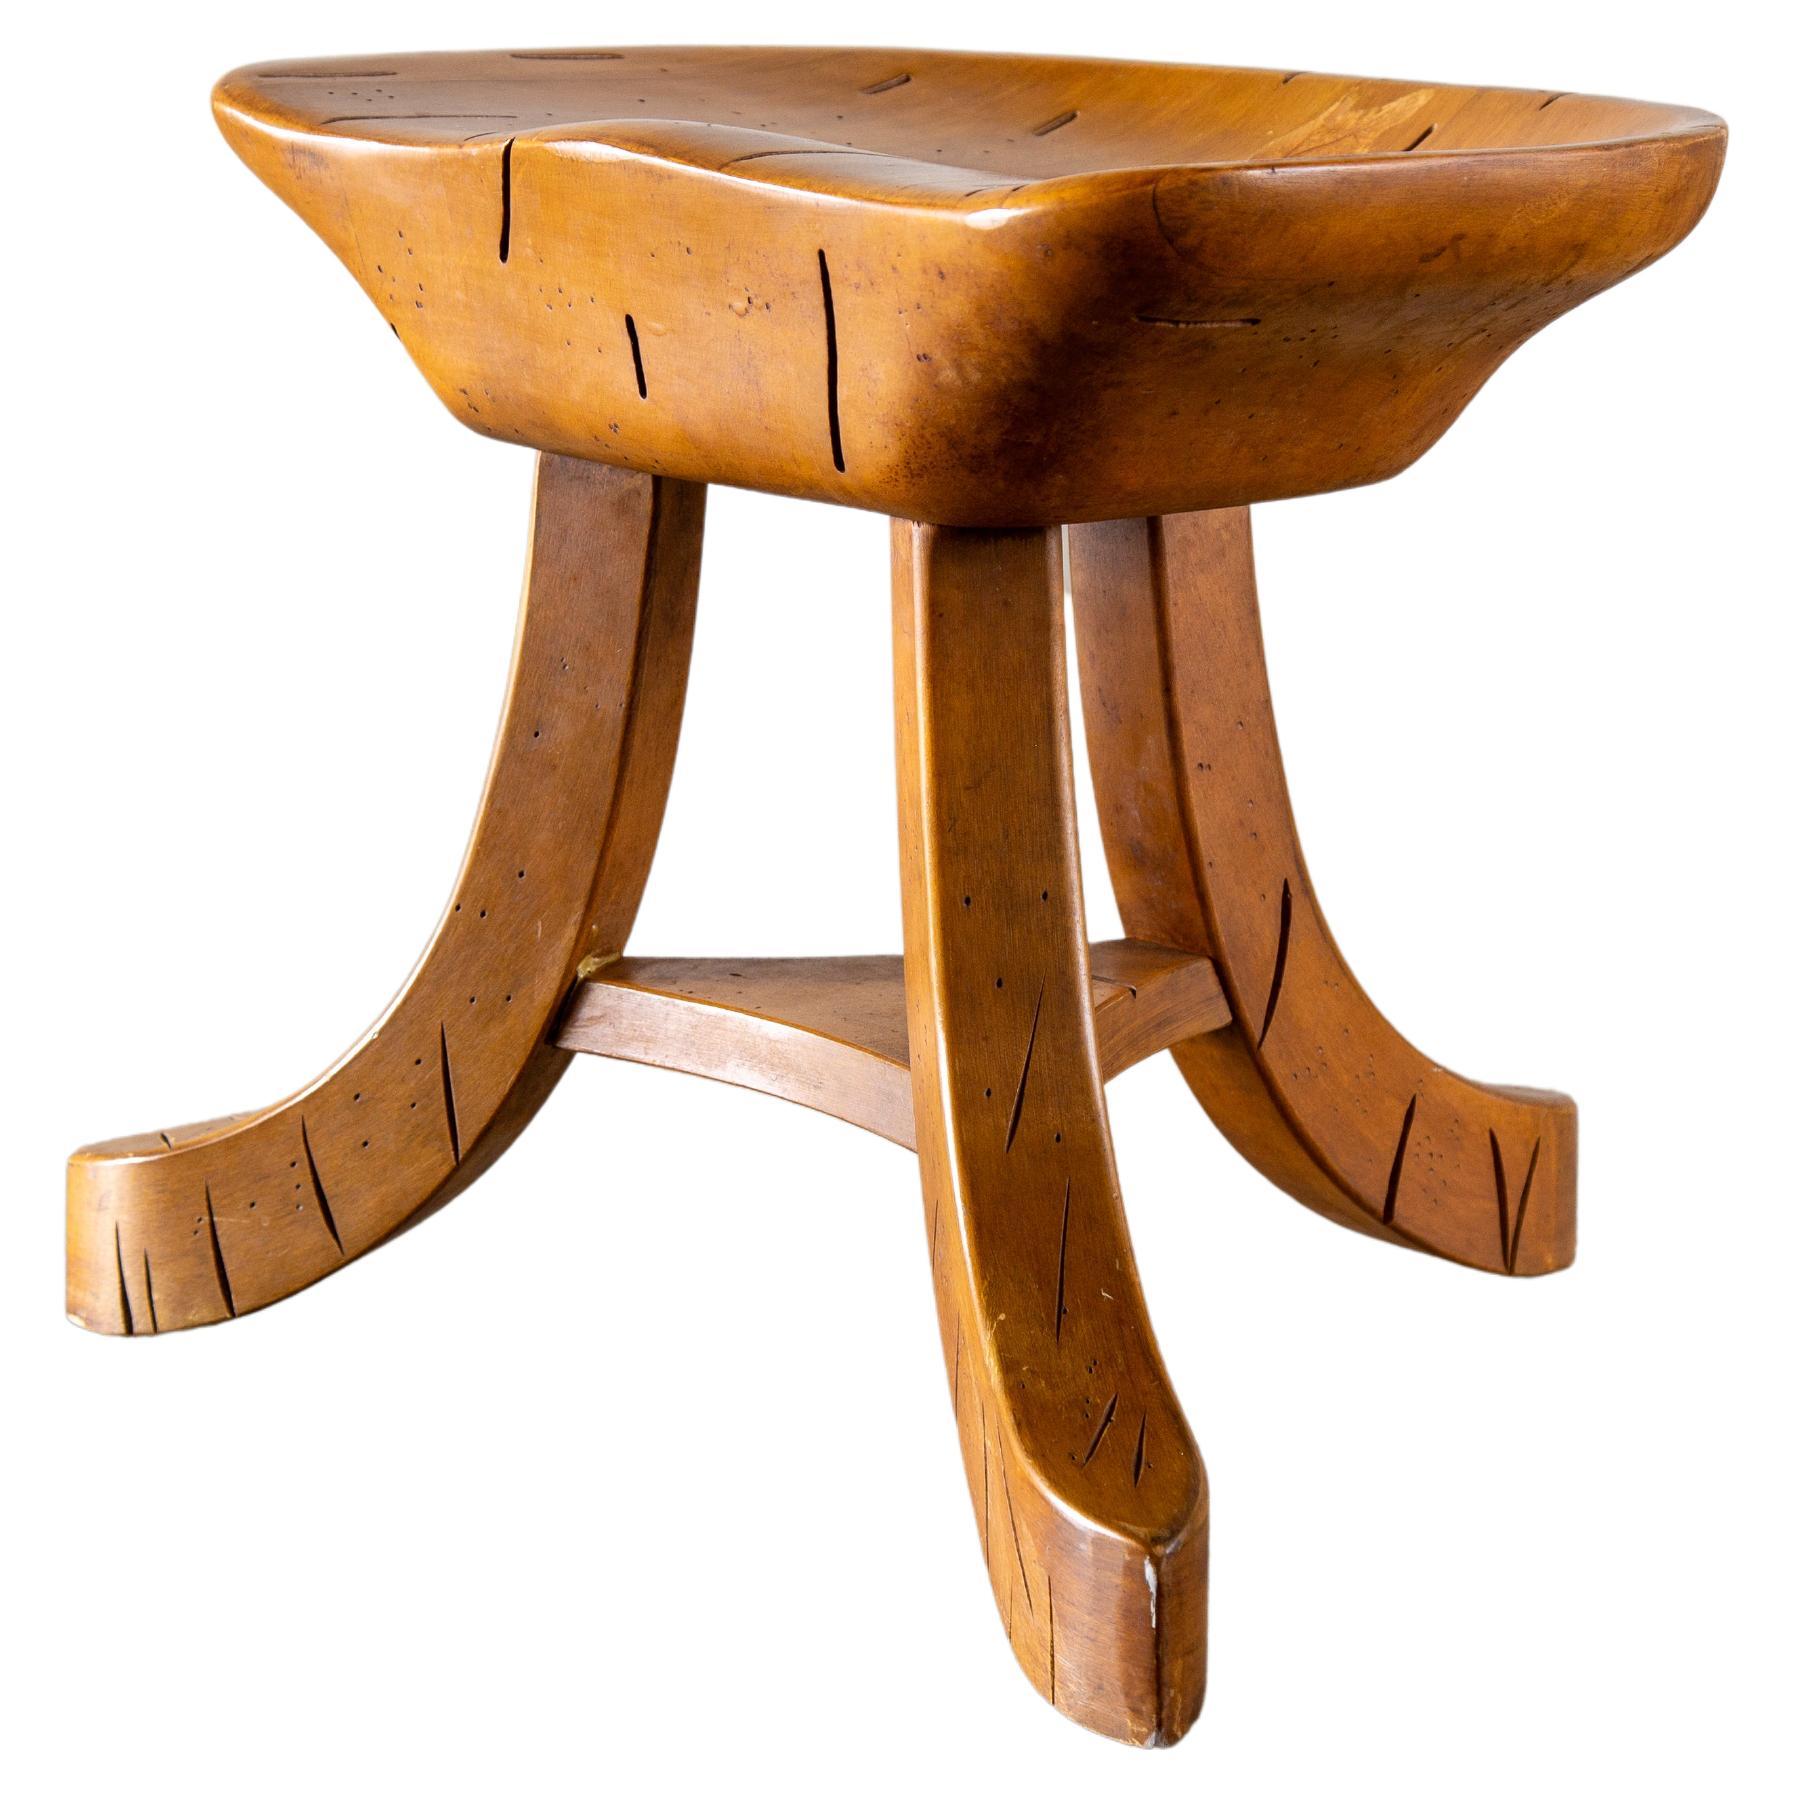 1966 Madison Park Ambrosia Maple Thebes style stool Adolf Loos For Sale